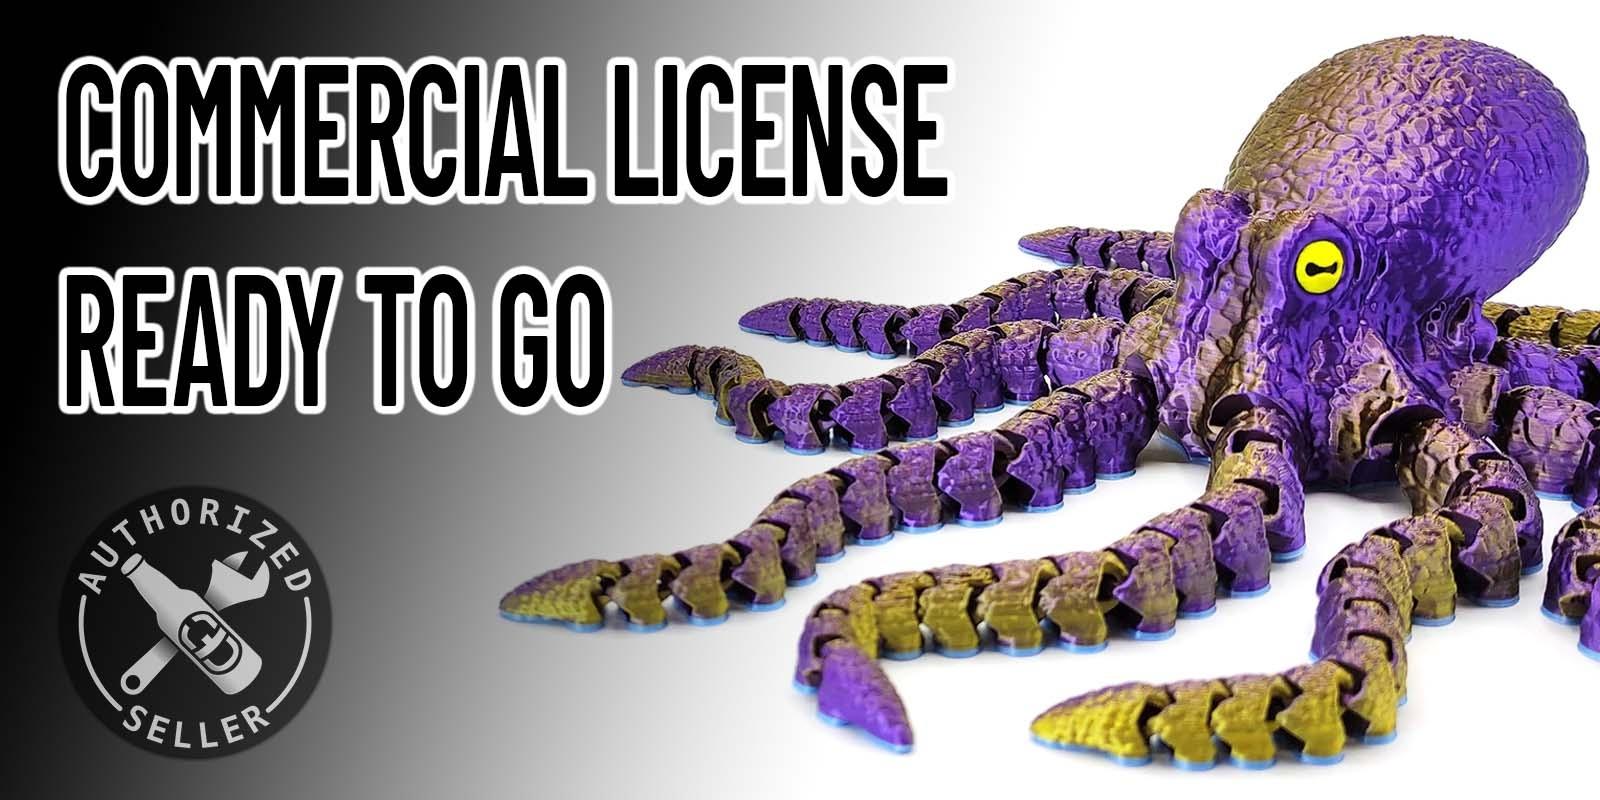 Commercial License - Ready to go